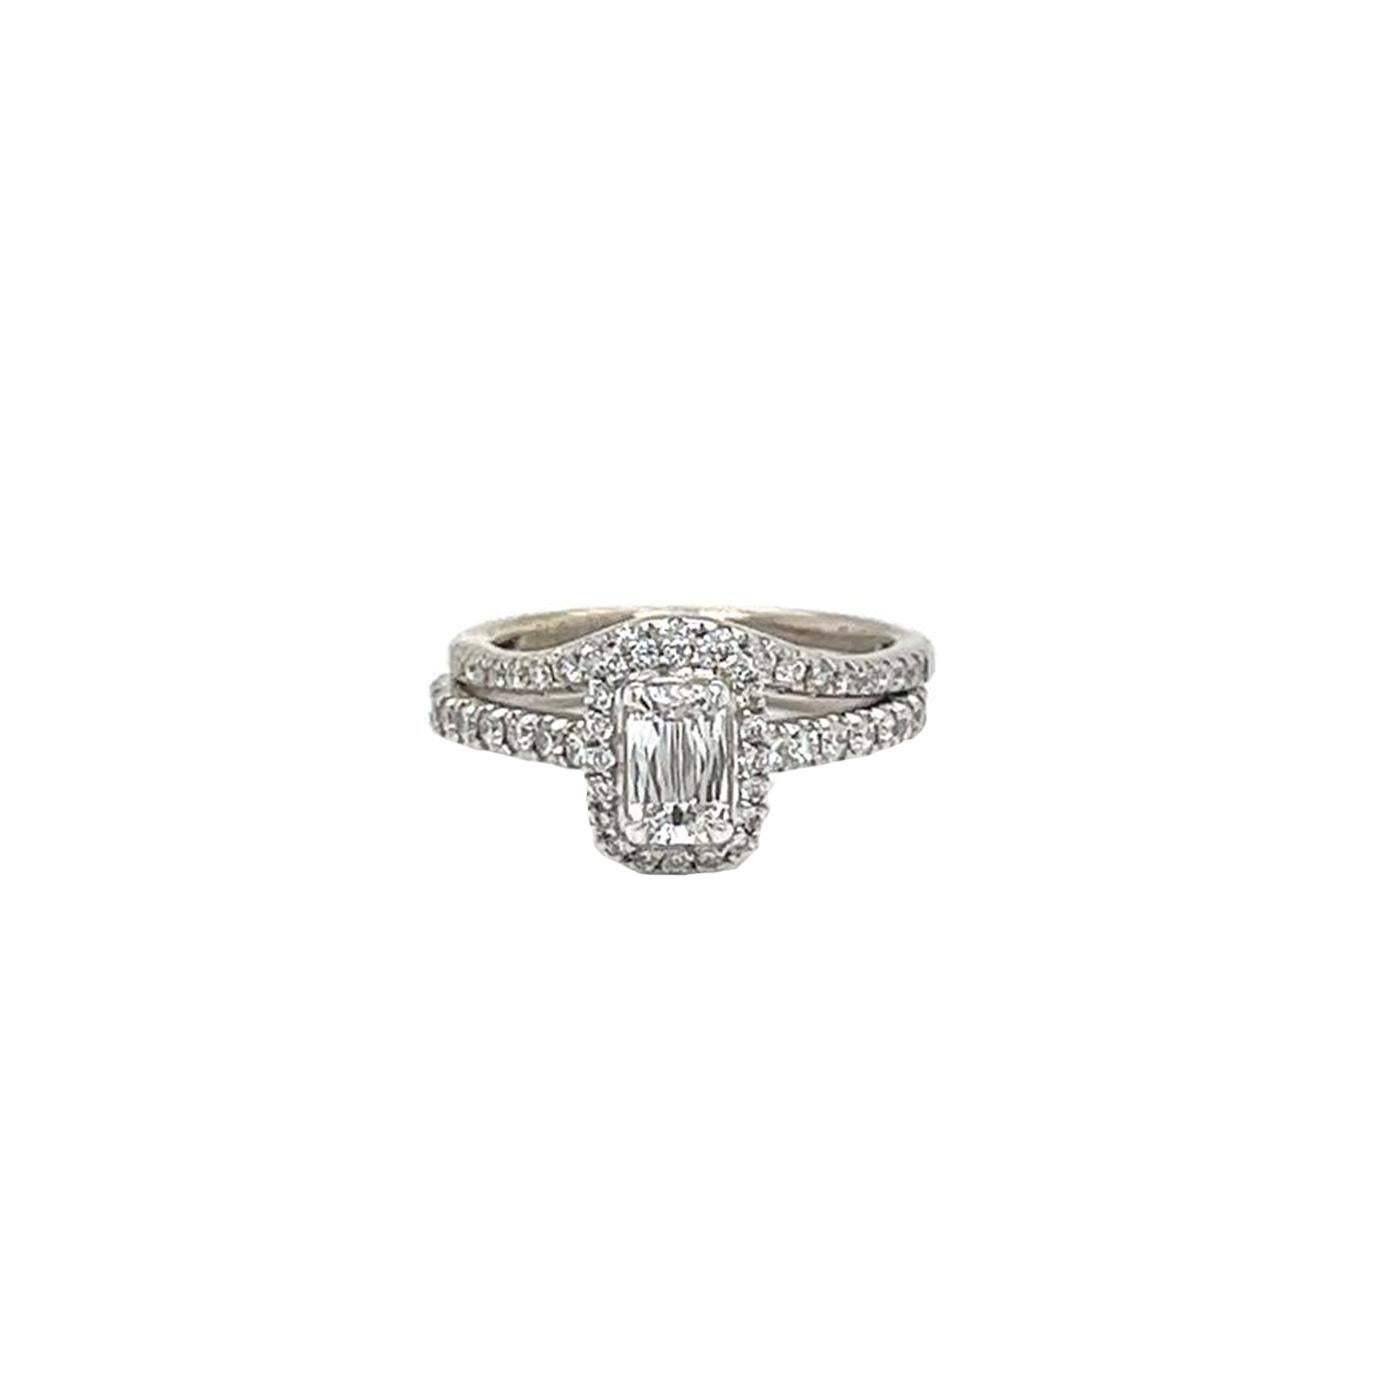 Beautiful emerald-cut diamond ring, centered on a 0.95 Carats Emerald-cut diamond of E color and VS1 clarity, Set in platinum with 0.45ct pave diamonds of D color and VS1 clarity, The Sparkling adds a touch to the piece, giving it a unique and